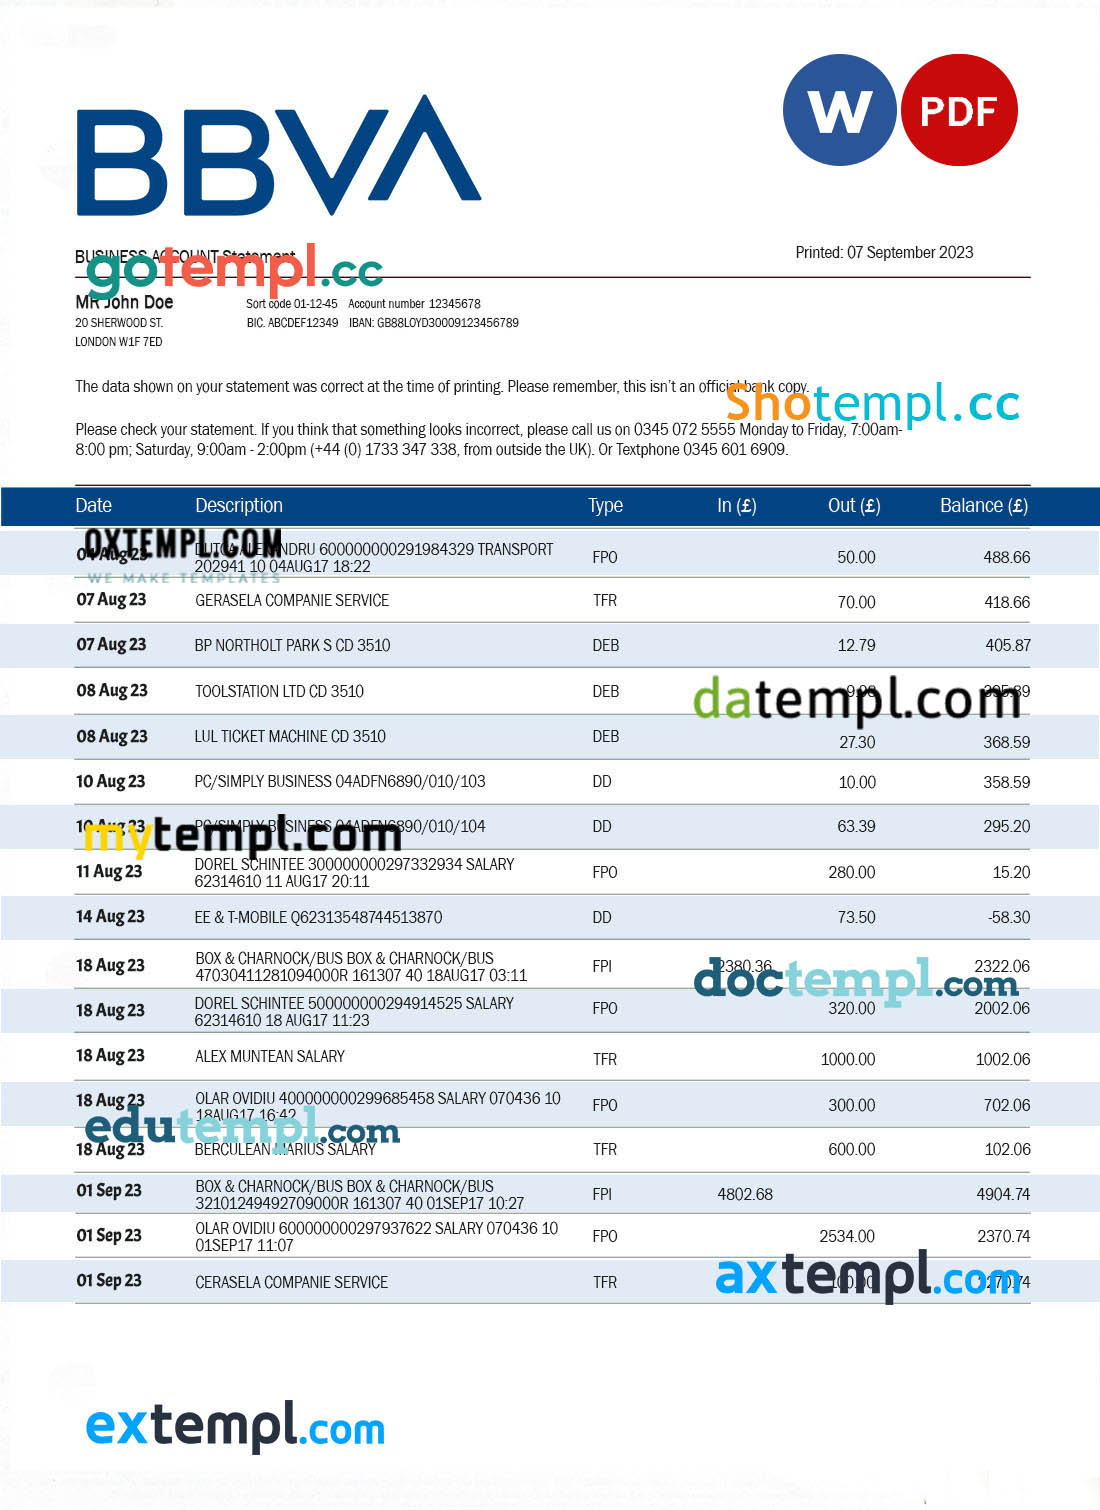 USA Texas commercial cleaning company earnings statement template in Word and PDF format